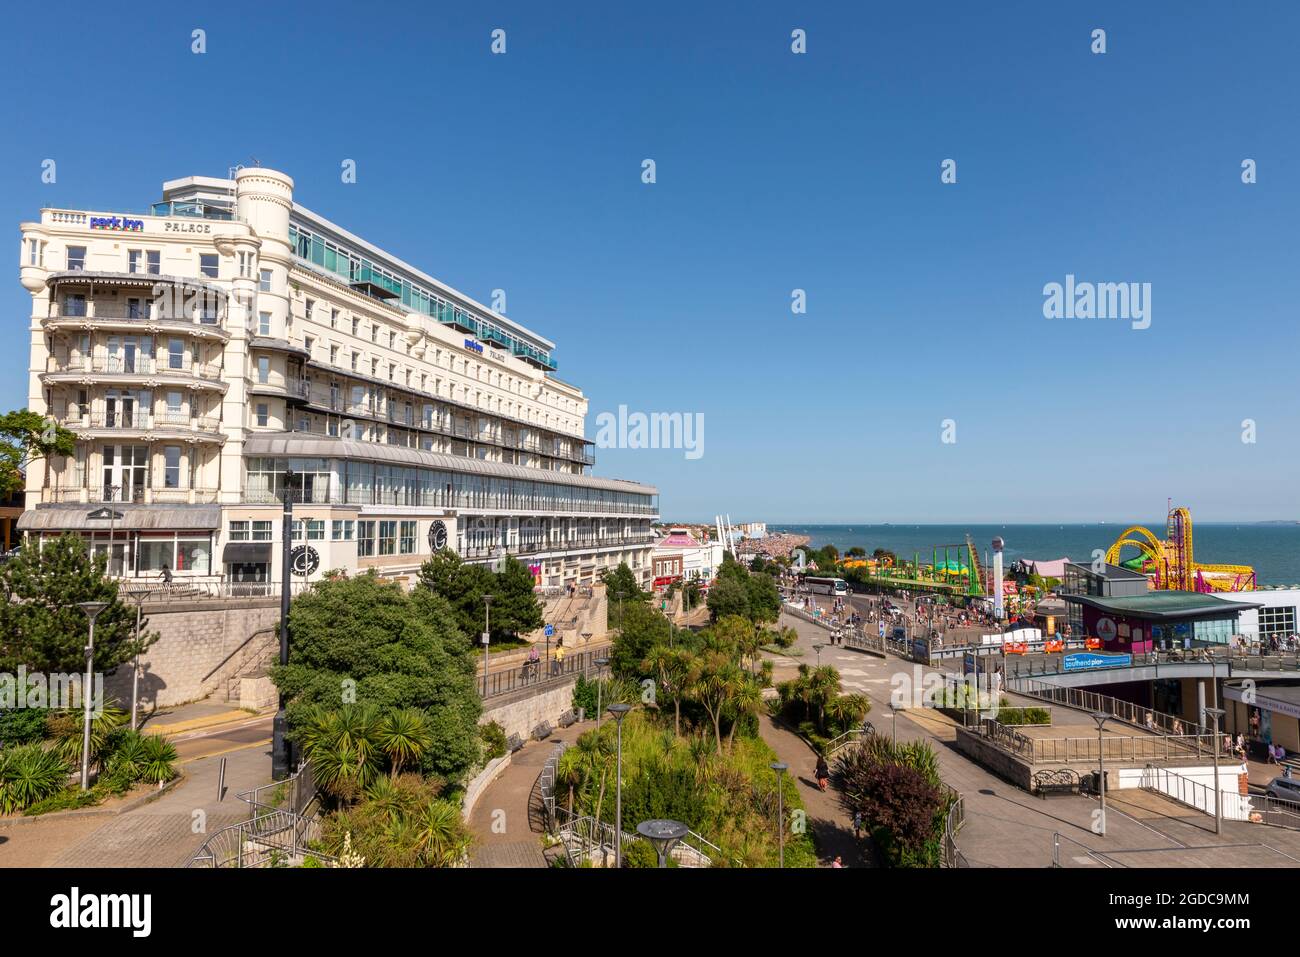 Park Inn Palace Hotel, by Radisson Palace, on Pier Hill overlooking the seafront at Southend-on-Sea, Essex. Seaside attractions and horizon of estuary Stock Photo